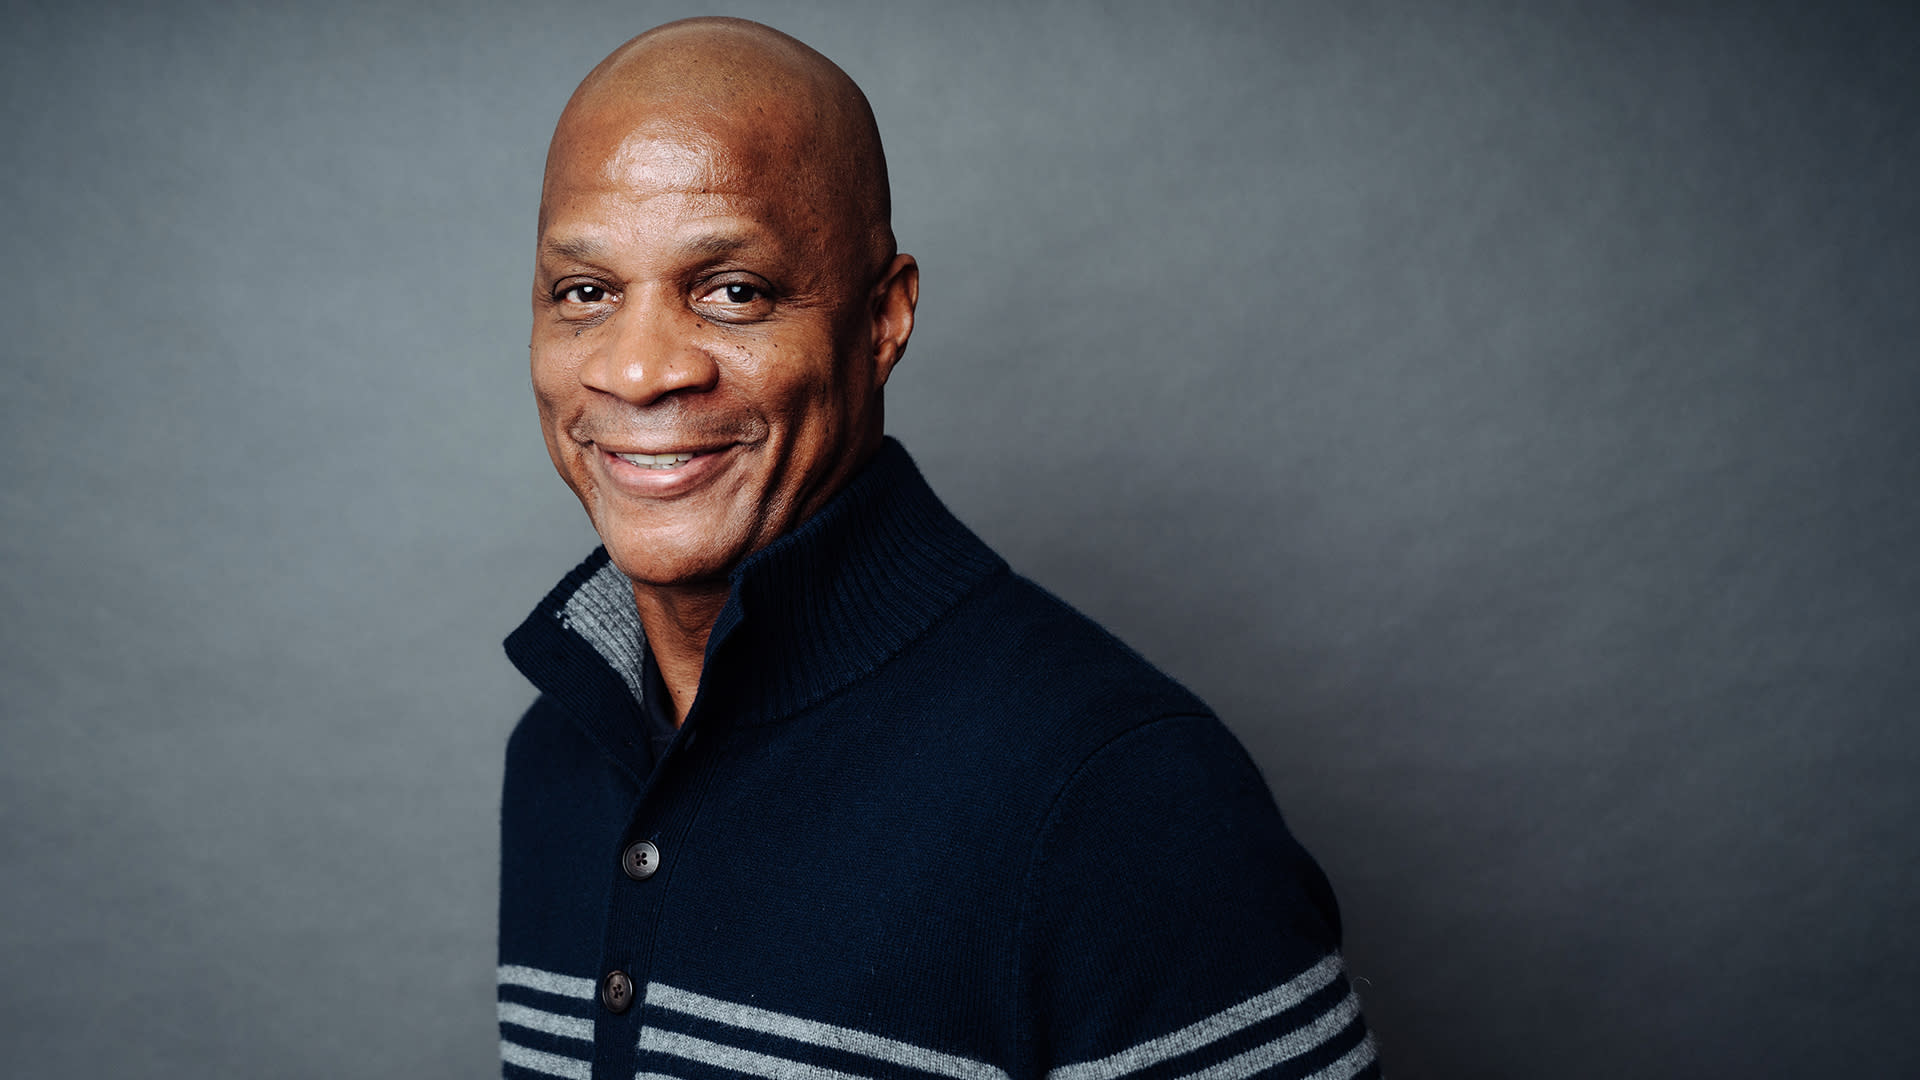 The Rush: Darryl Strawberry on bat flips, brawling and coping with